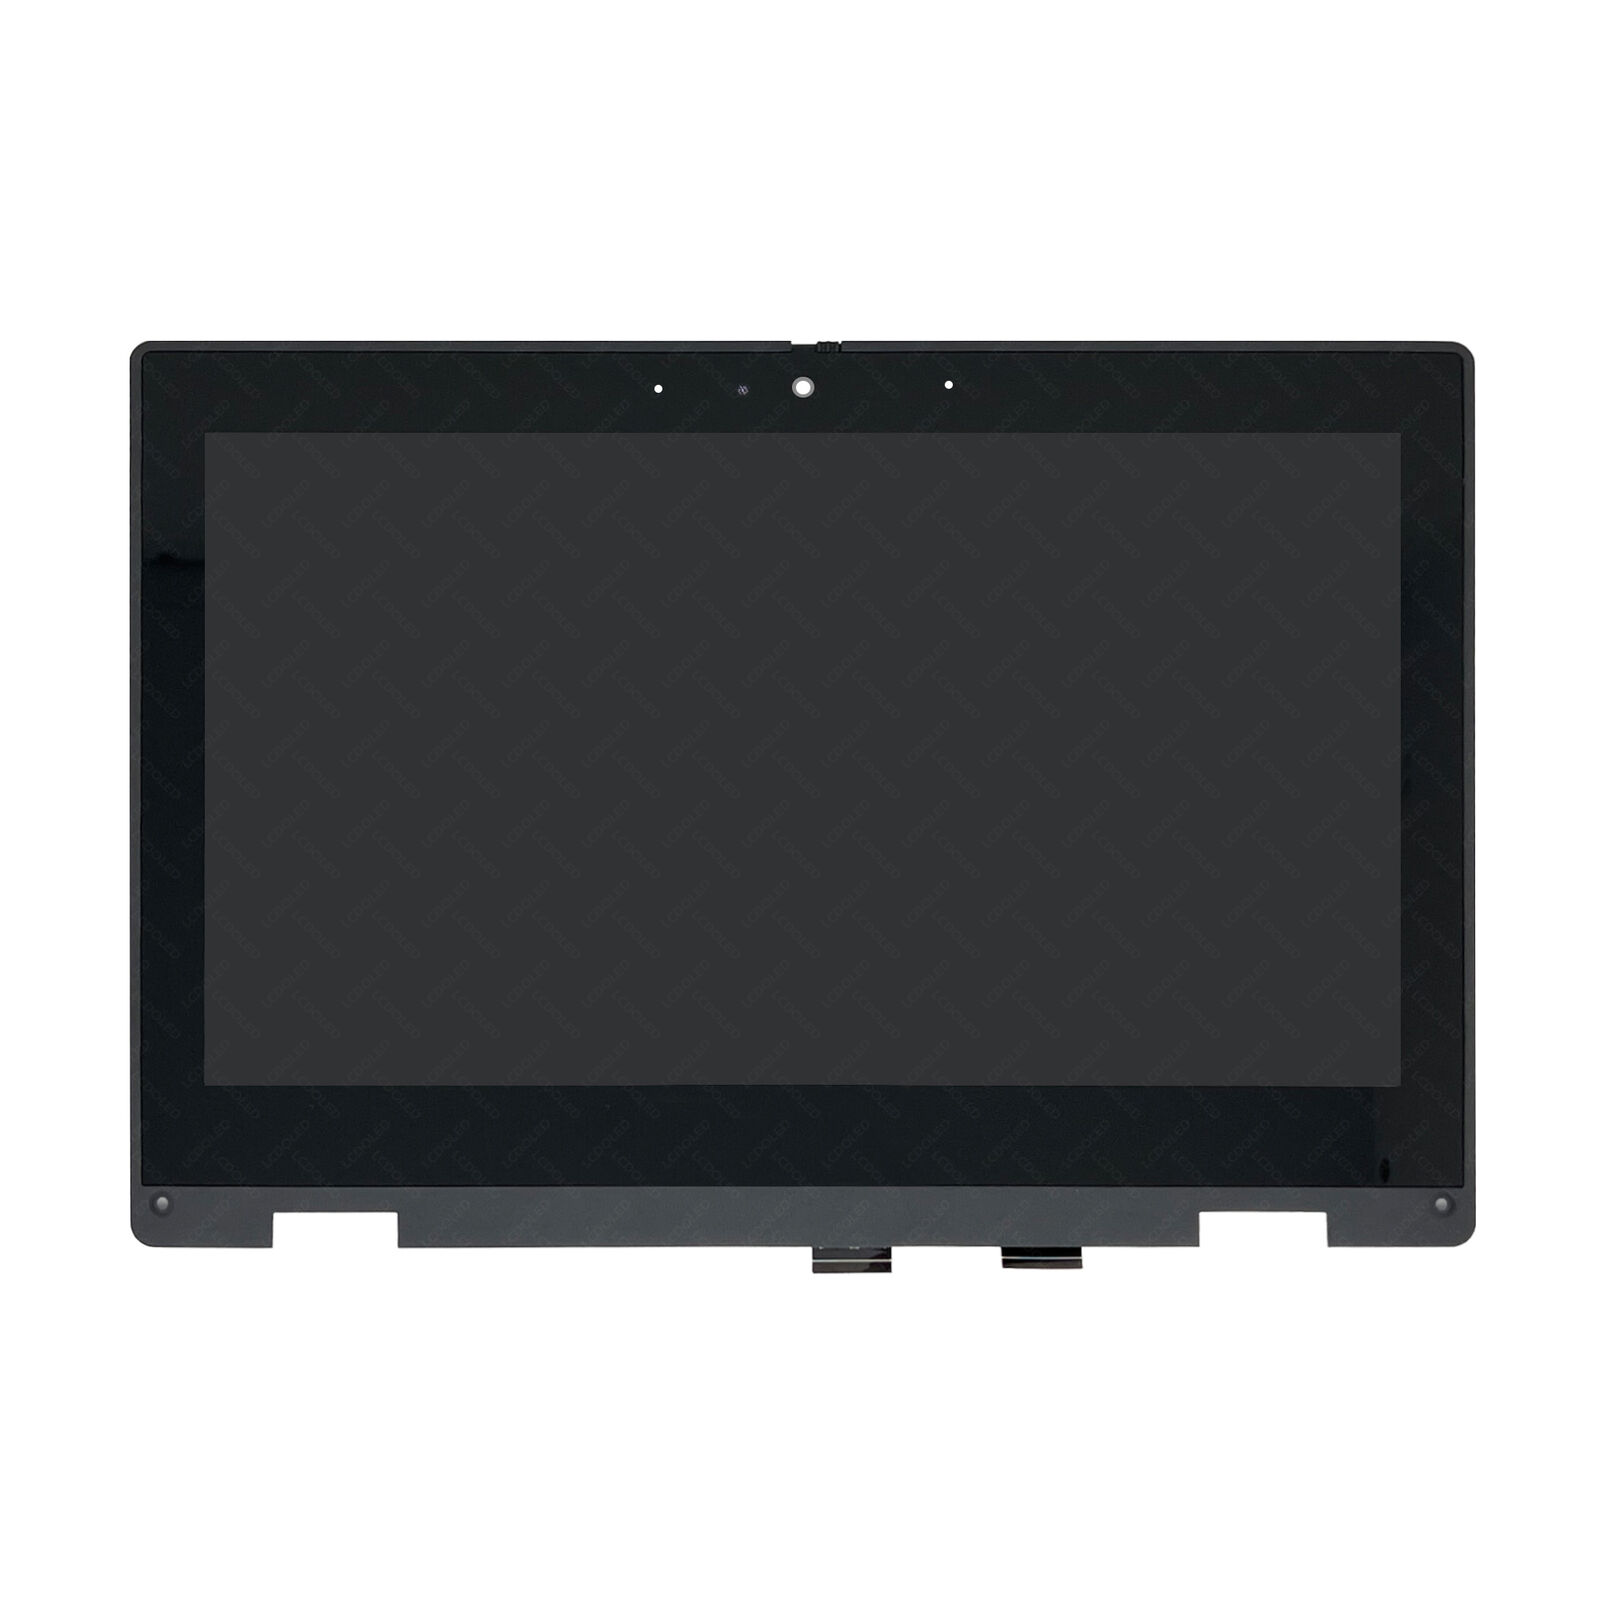 LED LCD Touch Screen Display Assembly+Bezel for ASUS BR1100 BR1100CKA BR1100FKA